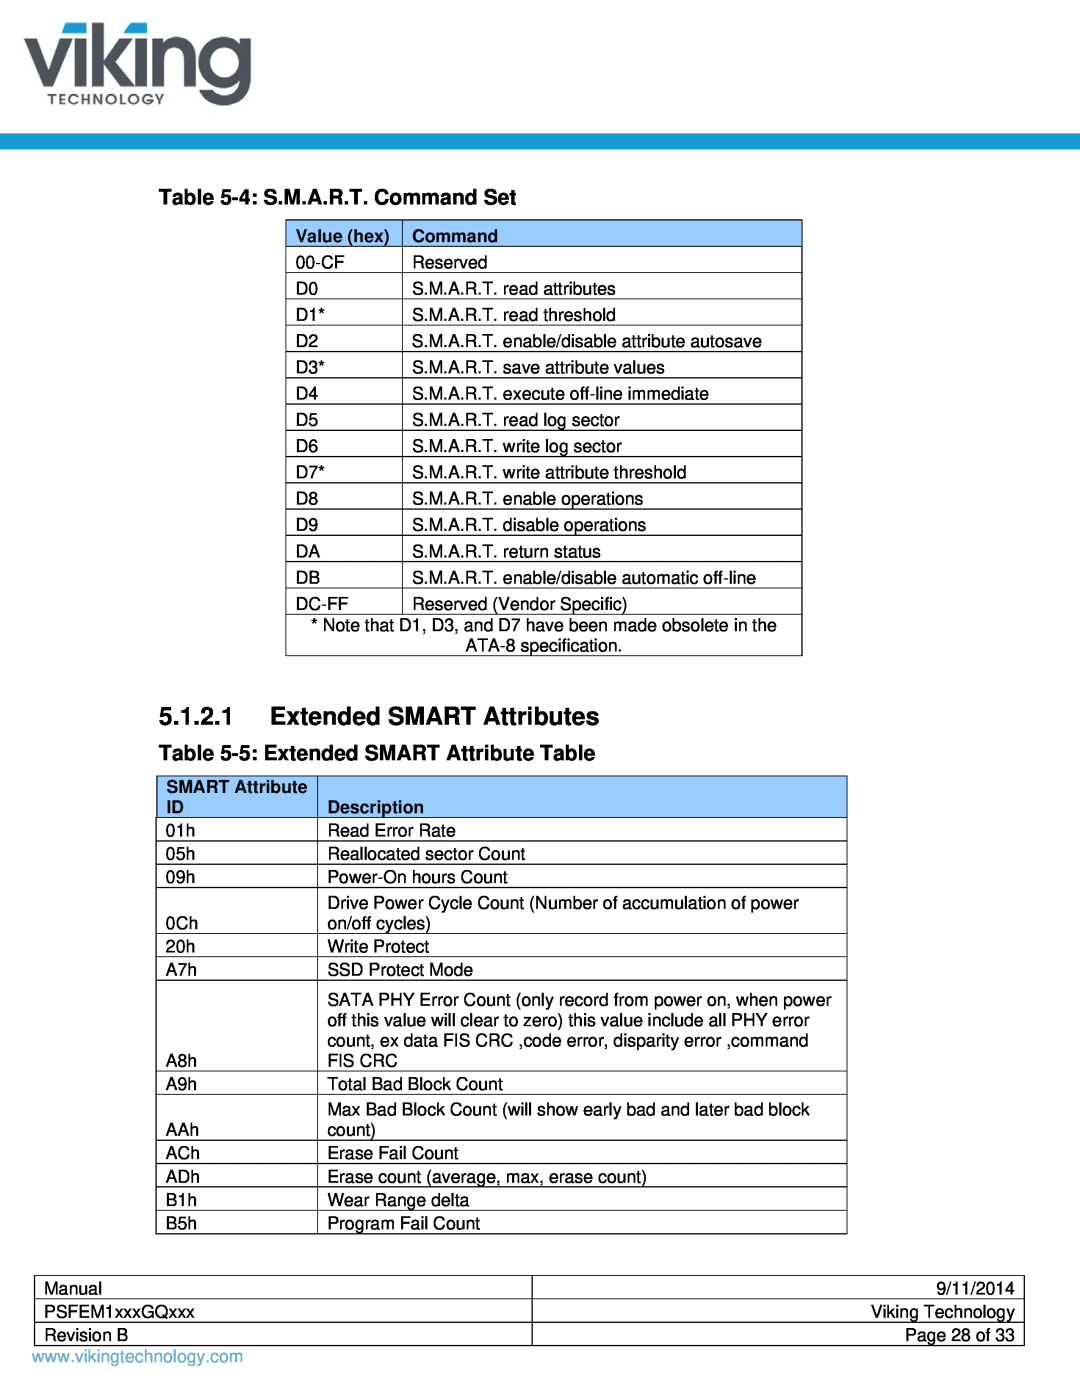 Viking PSFEM1xxxGQxxx manual Extended SMART Attributes, 4 S.M.A.R.T. Command Set, 5 Extended SMART Attribute Table 